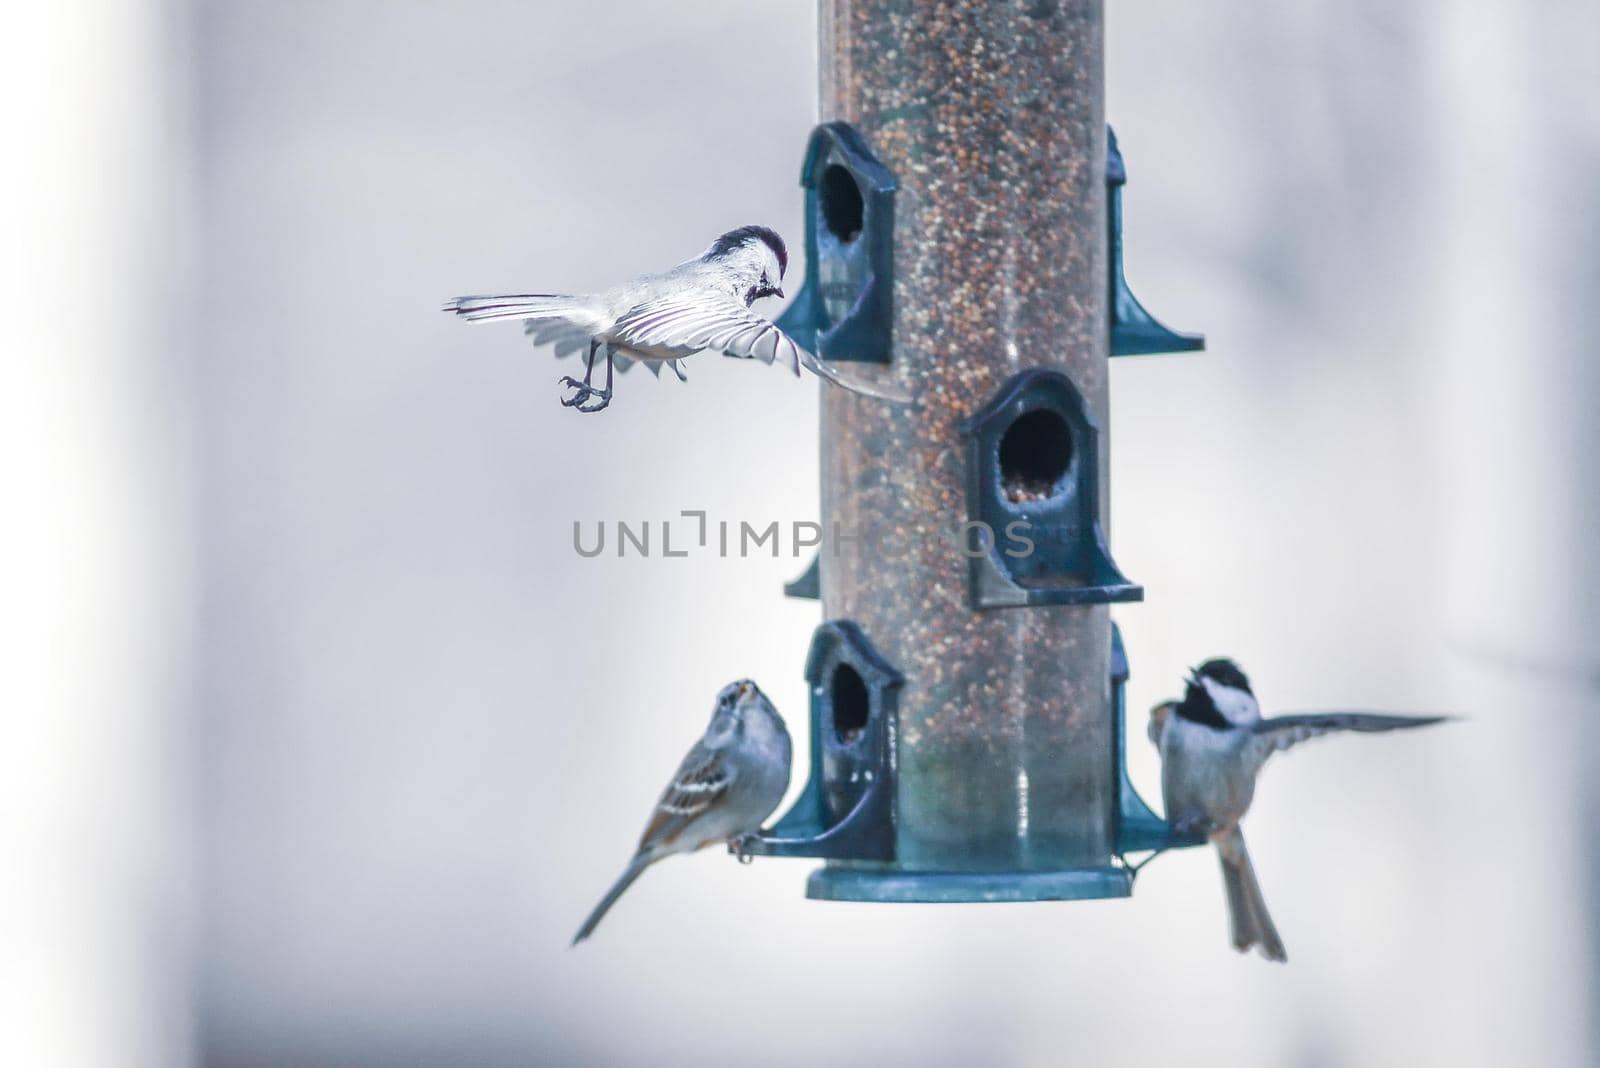 birds feeding and playing at the feeder by digidreamgrafix